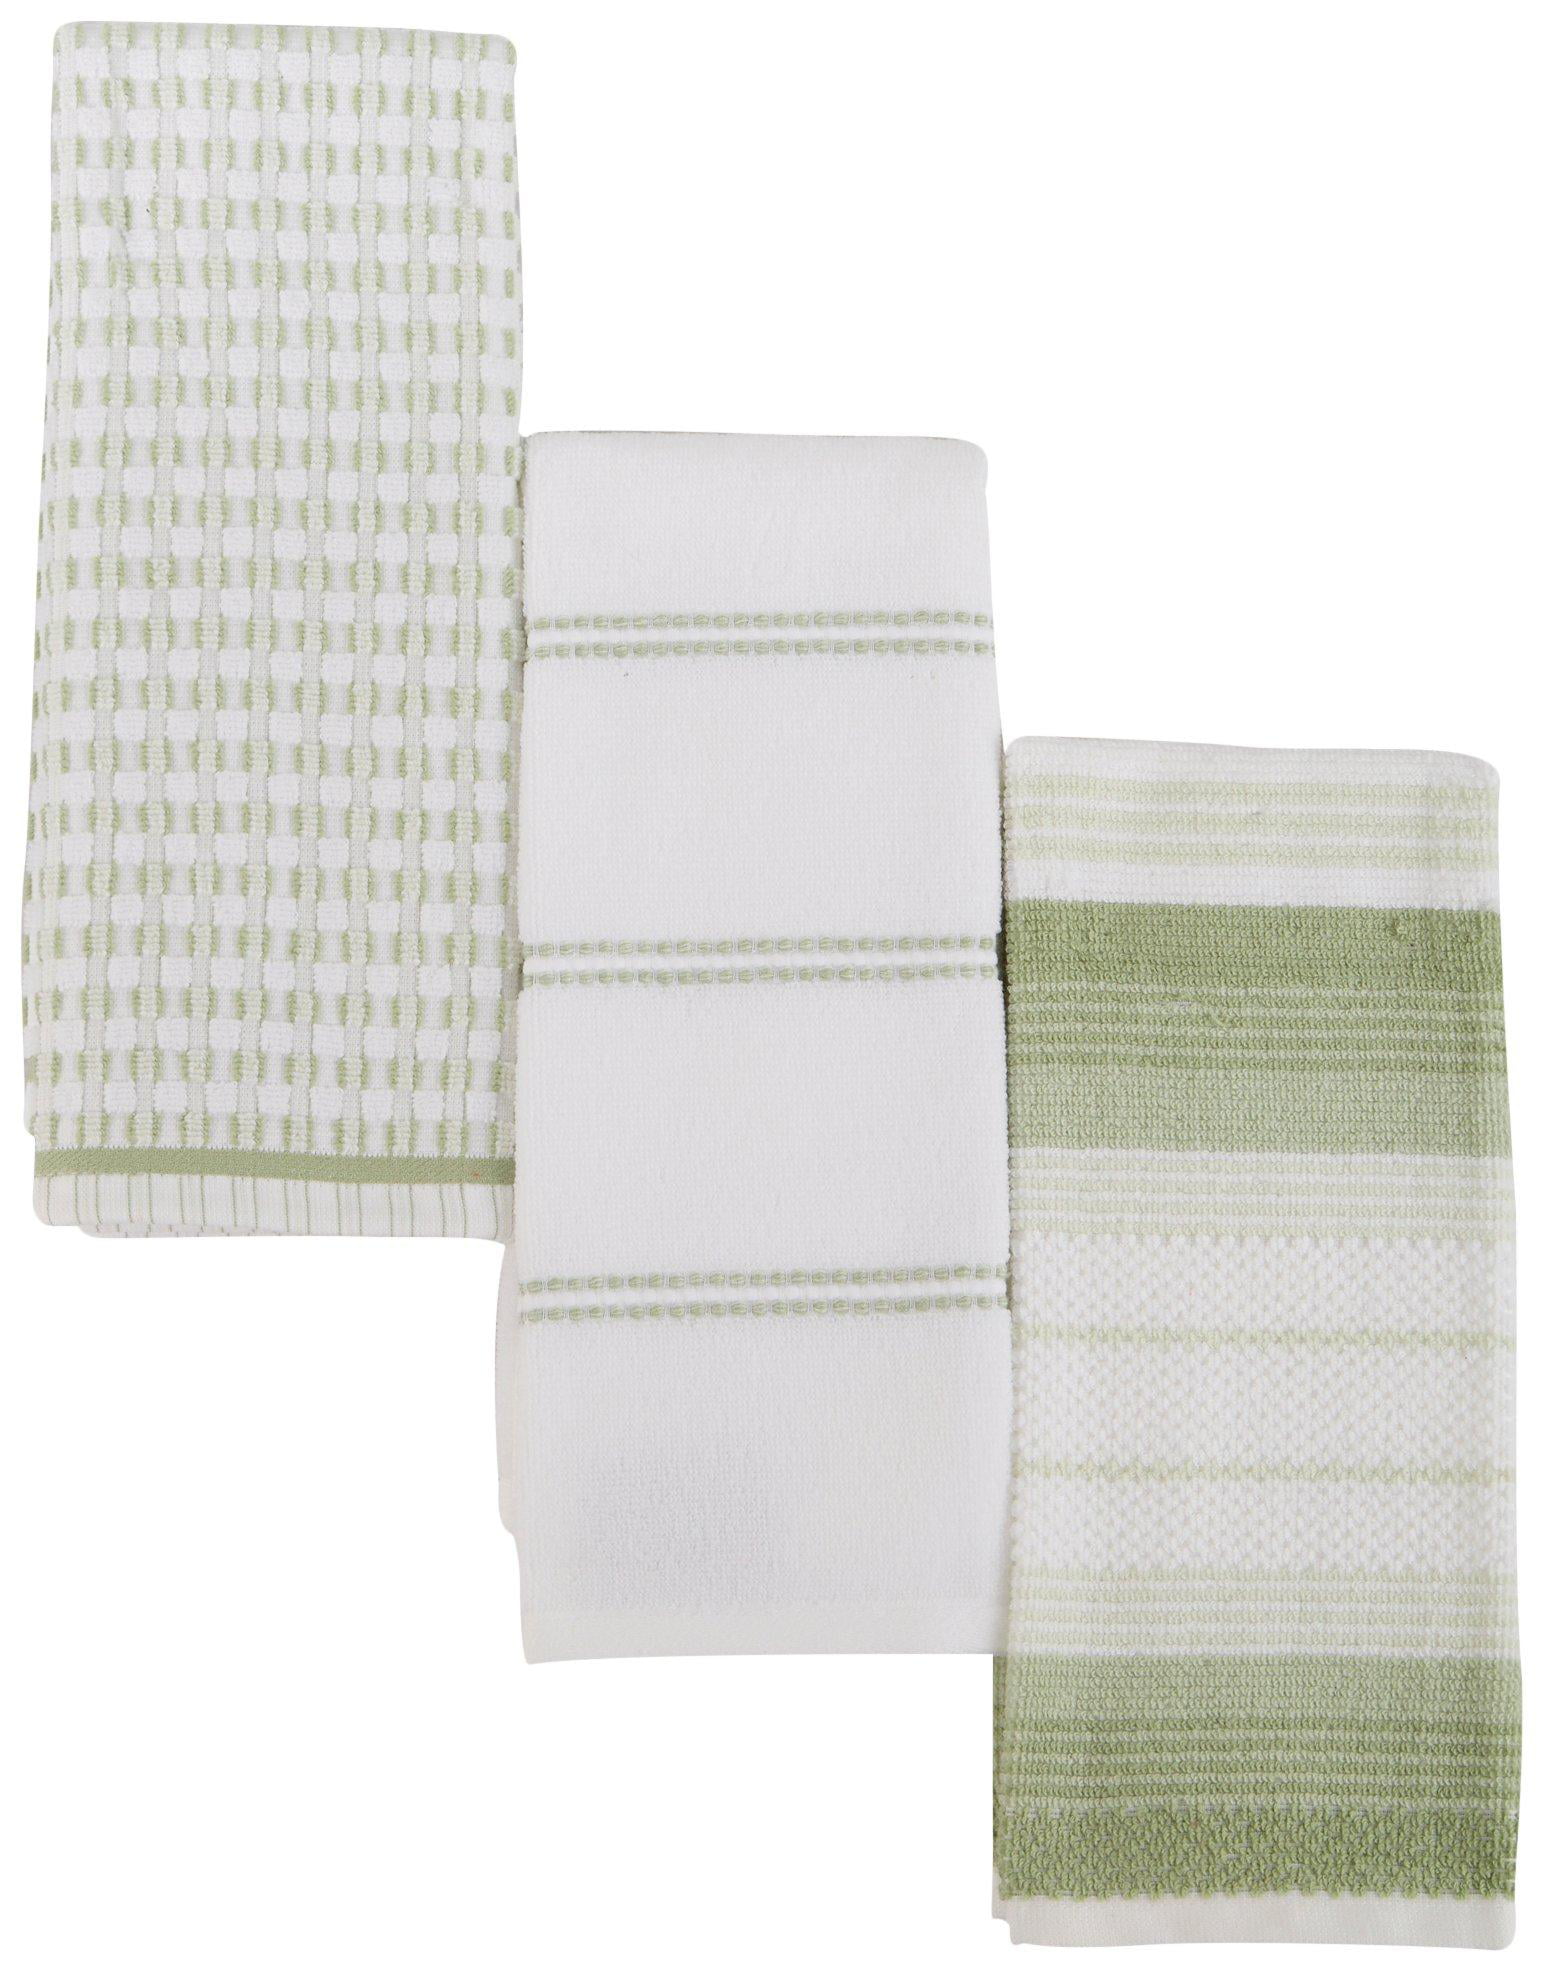 Home Collection Home Kitchen Textiles Set 60 Napkins Disposable Paper 3-ply Pattern Green Stripes 